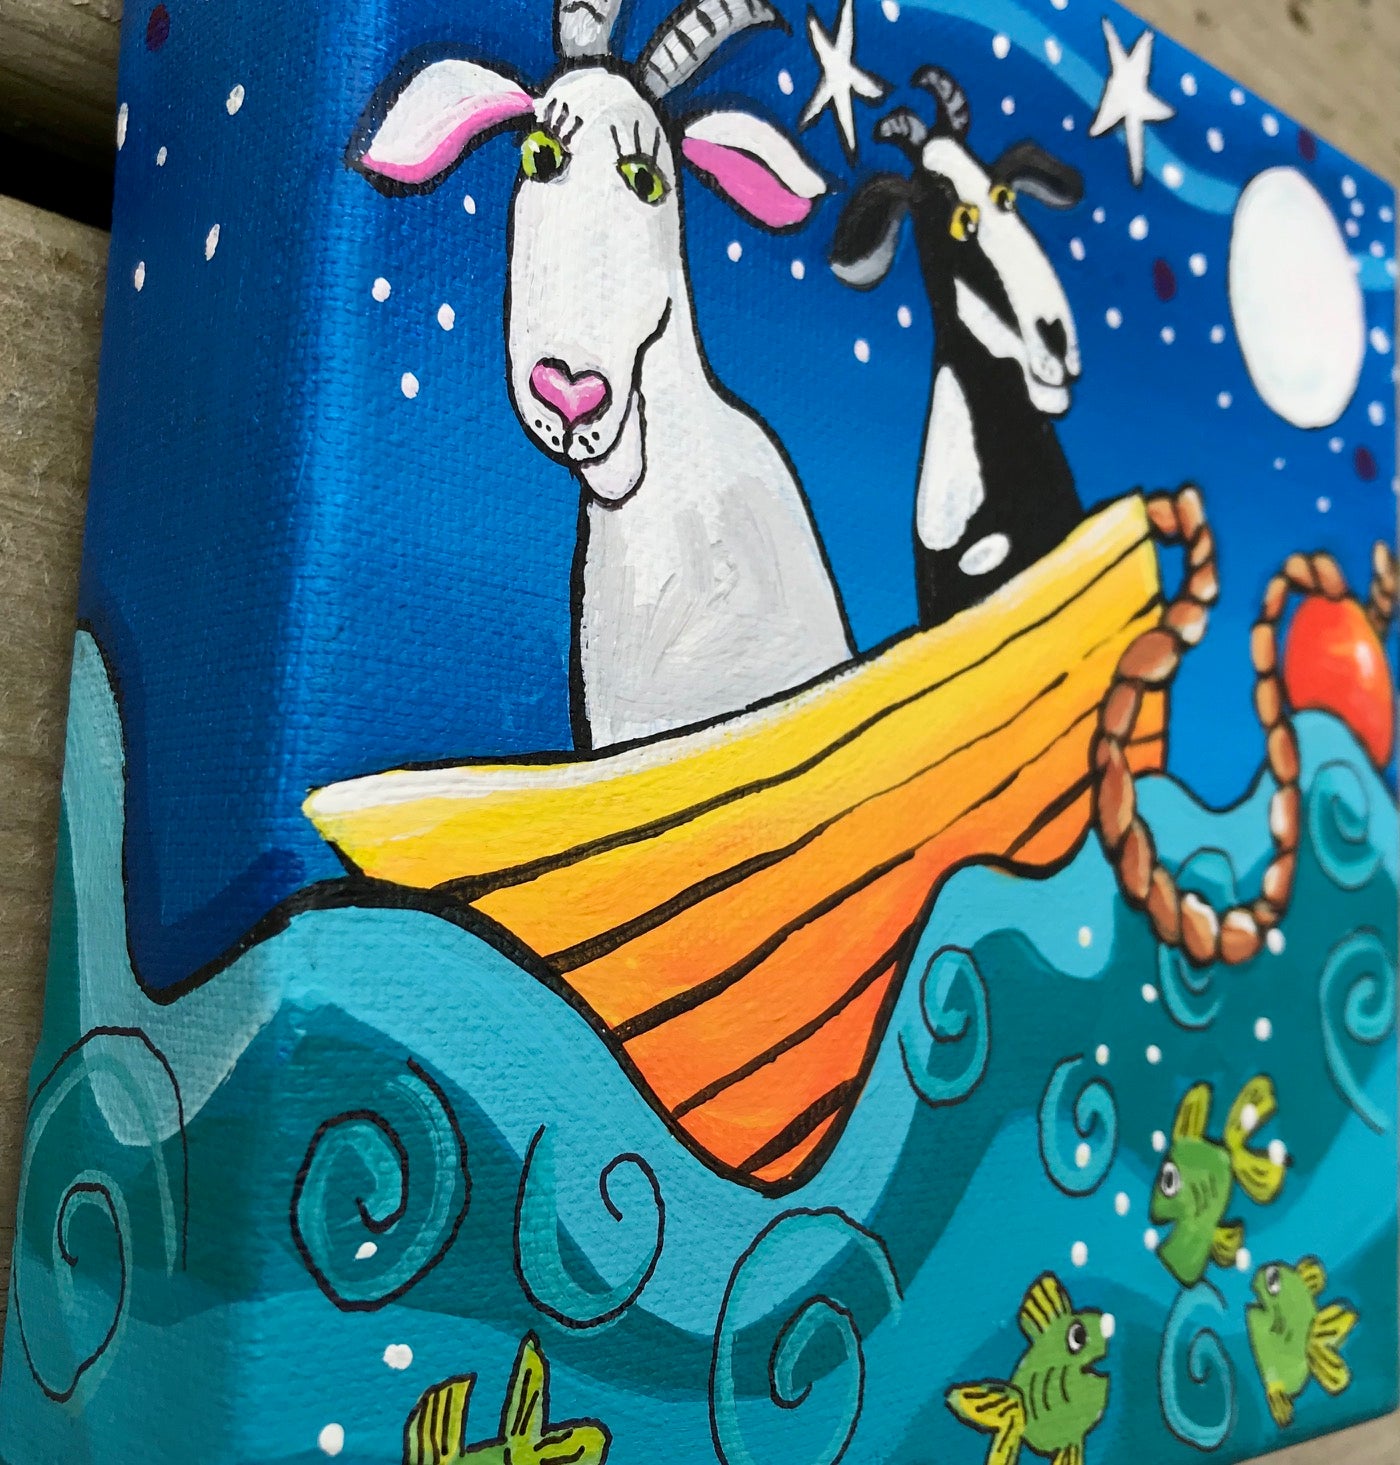 (SOLD) We'll Drift and We'll Float in Our Old Goaty Boat and We'll Wish Upon Stars in the Sky, We'll Sing and We'll Sway as the Fishy Fish Play, Together, Old Goat You and I